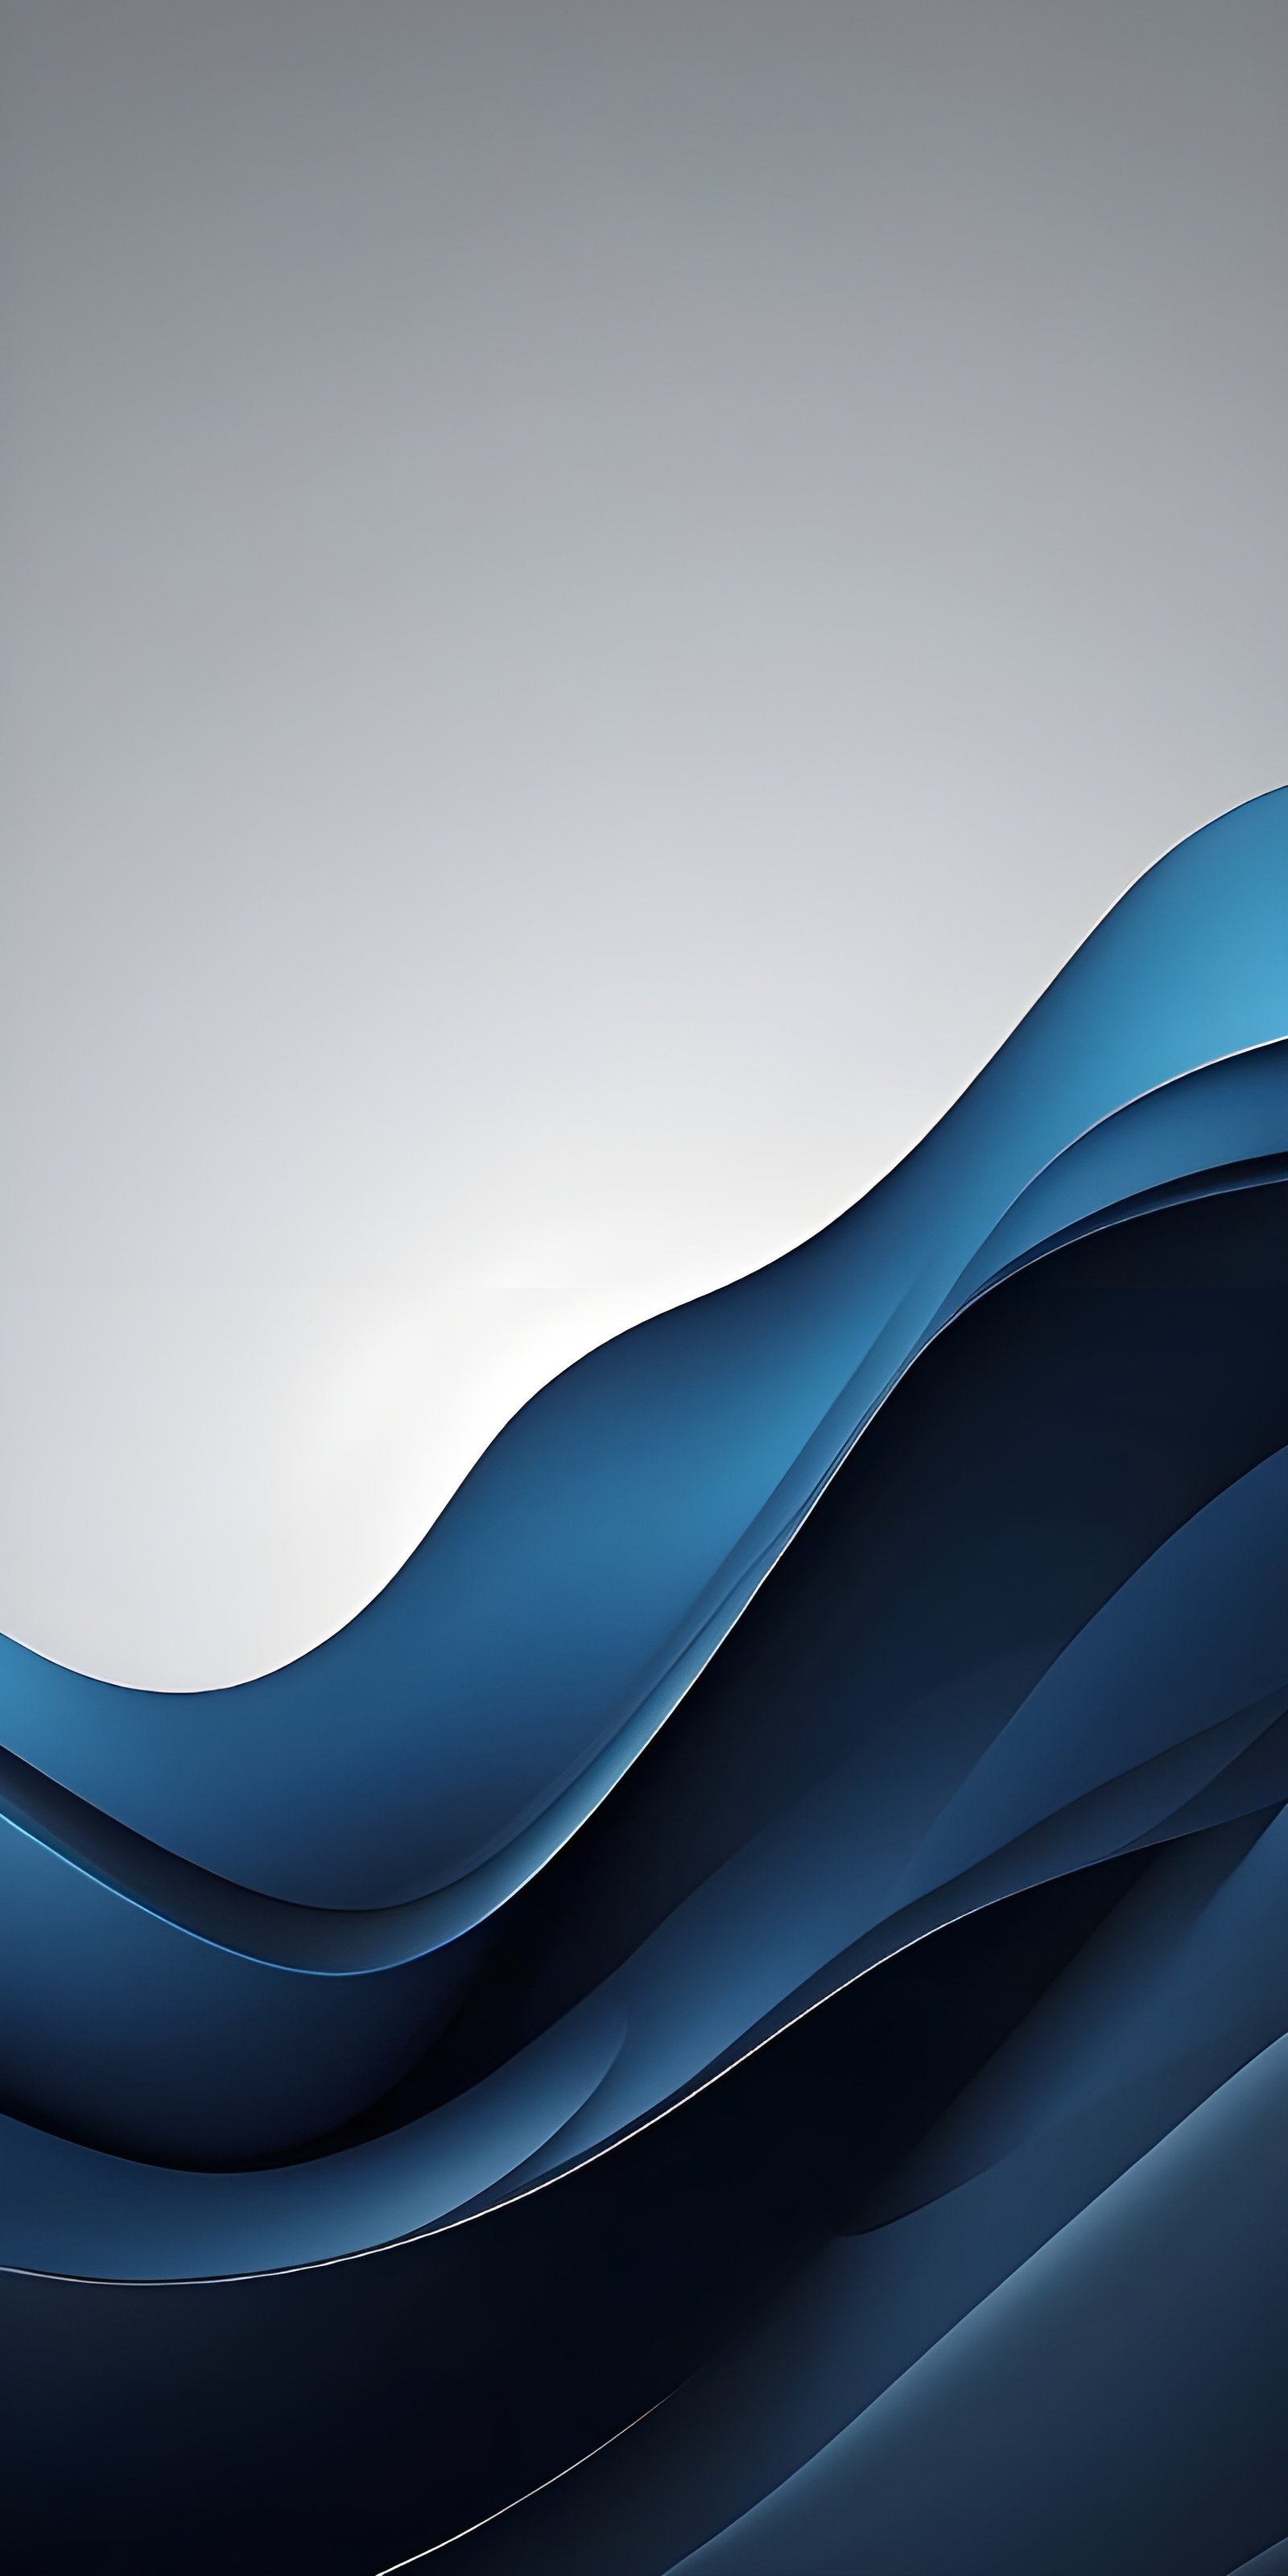 Interesting Blue Waves Best Abstract Wallpaper for Phone